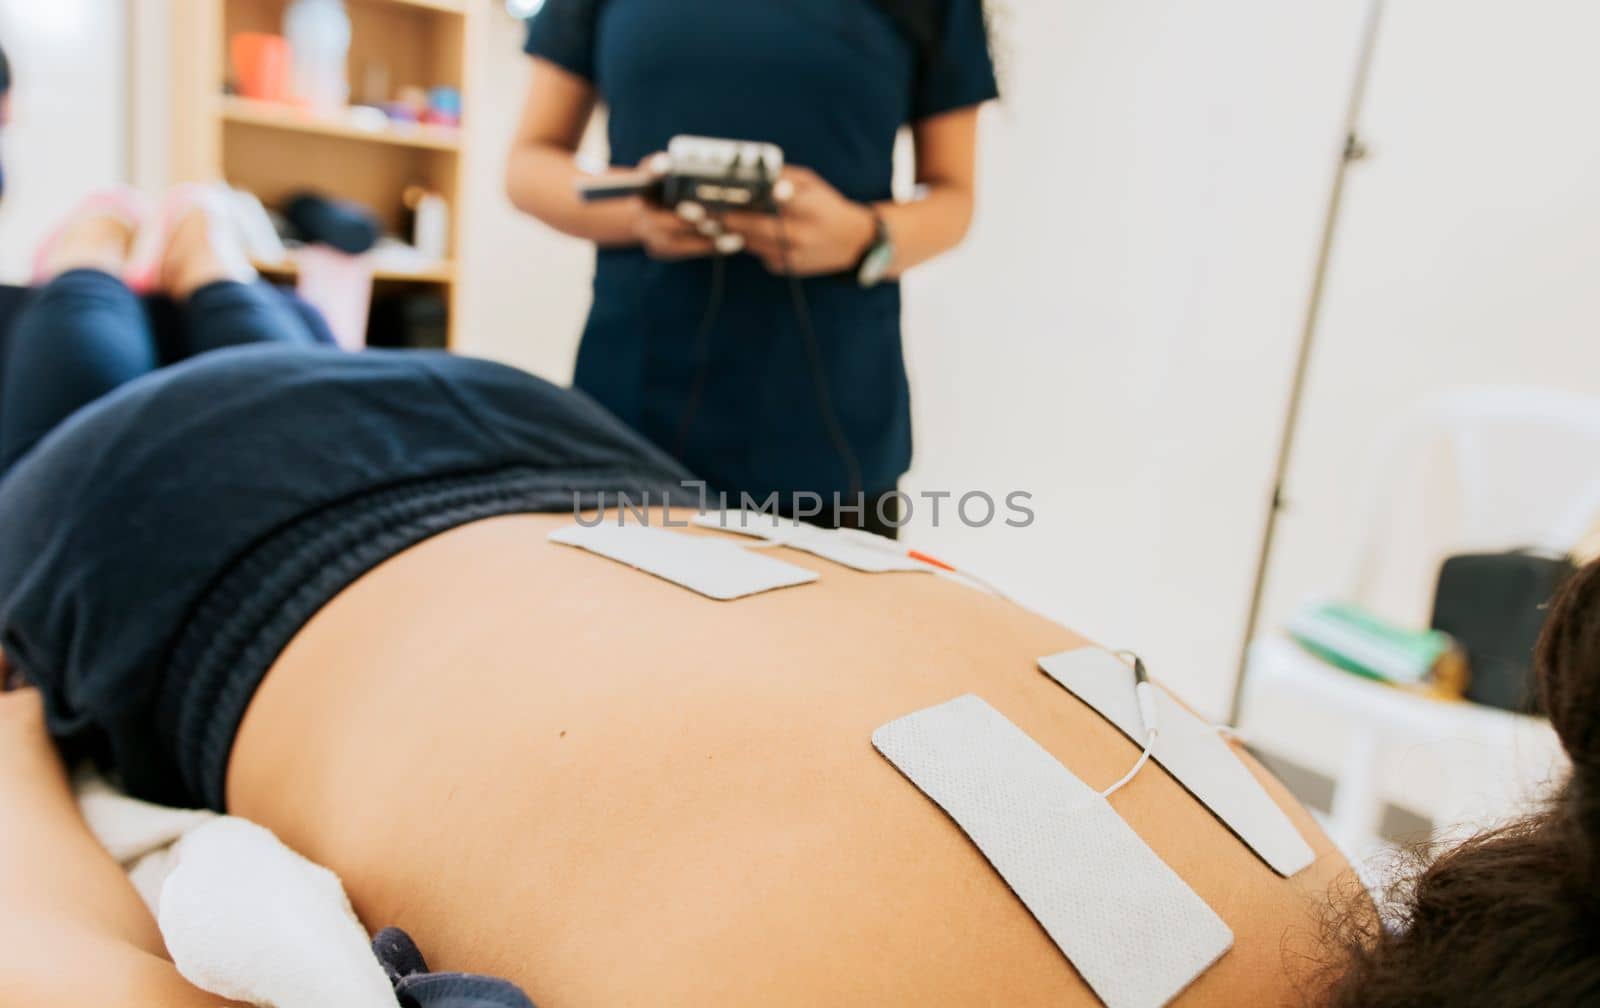 Physiotherapist electrostimulating a patient, Electrode treatment to patient lying down, Professional physiotherapist electrostimulating a lying patient. Lower back therapy with electrode pads